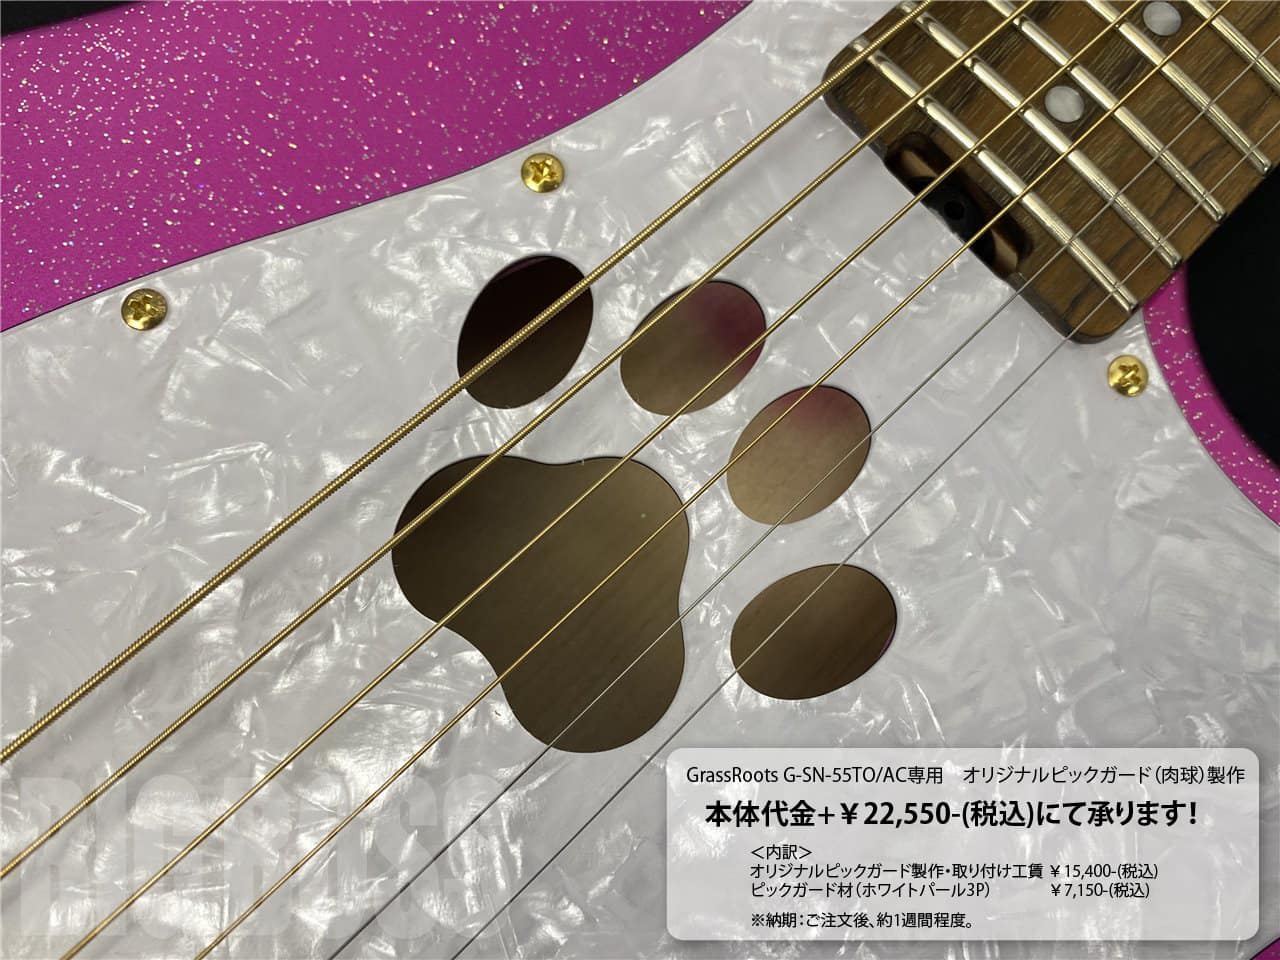 GrassRoots G-SN-55TO/AC Produced by Takayoshi Ohmura